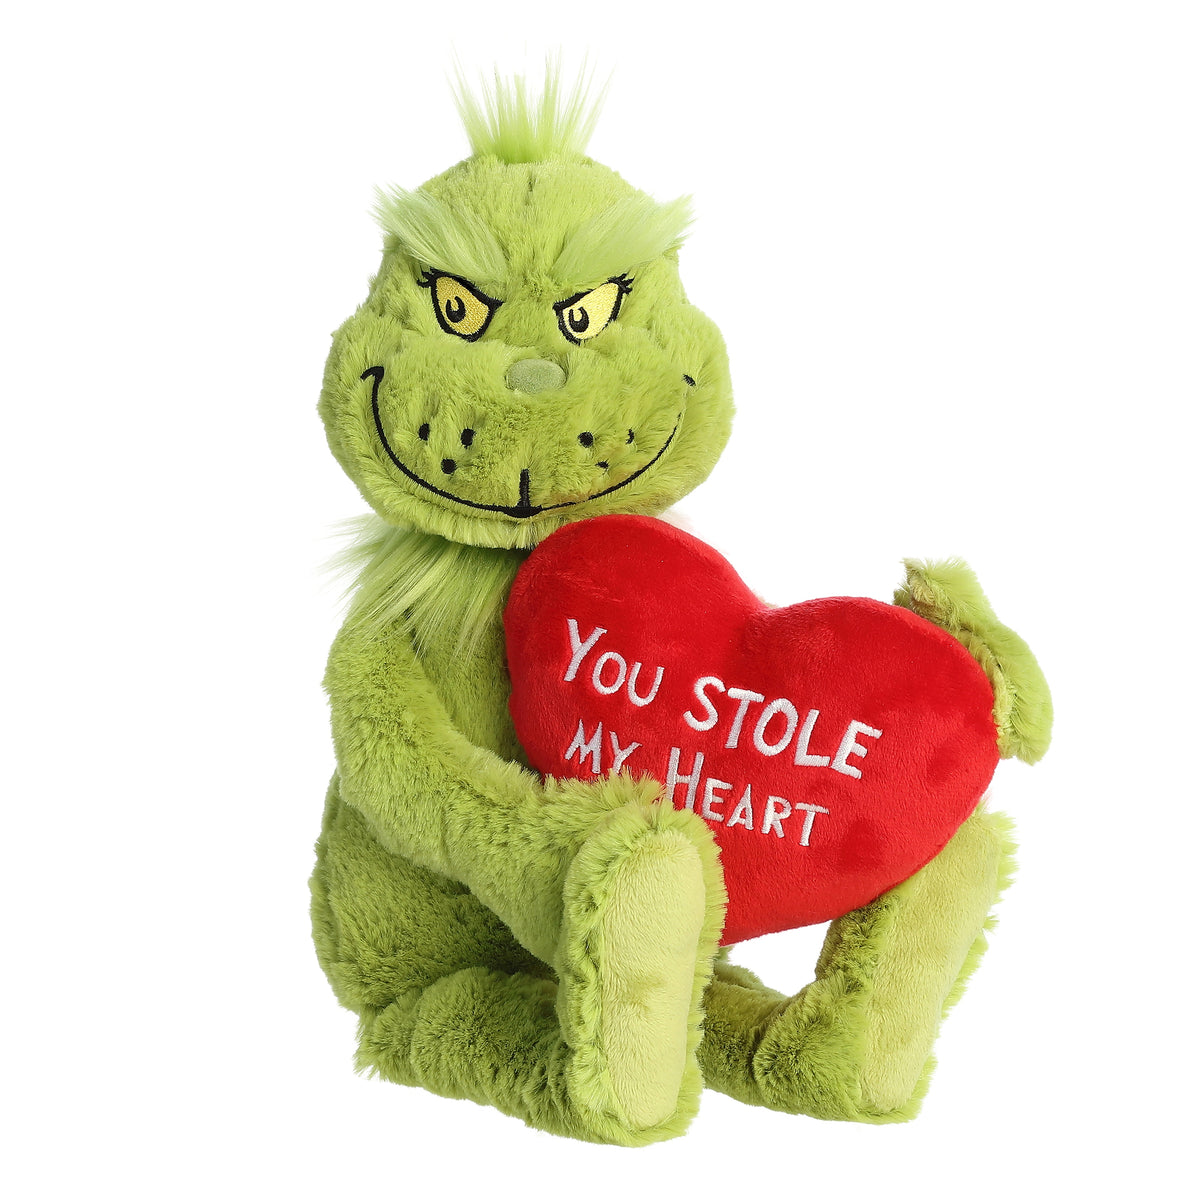 Grinch plush, with a mischievous grin and holding a red heart that says "You Stole My Heart"